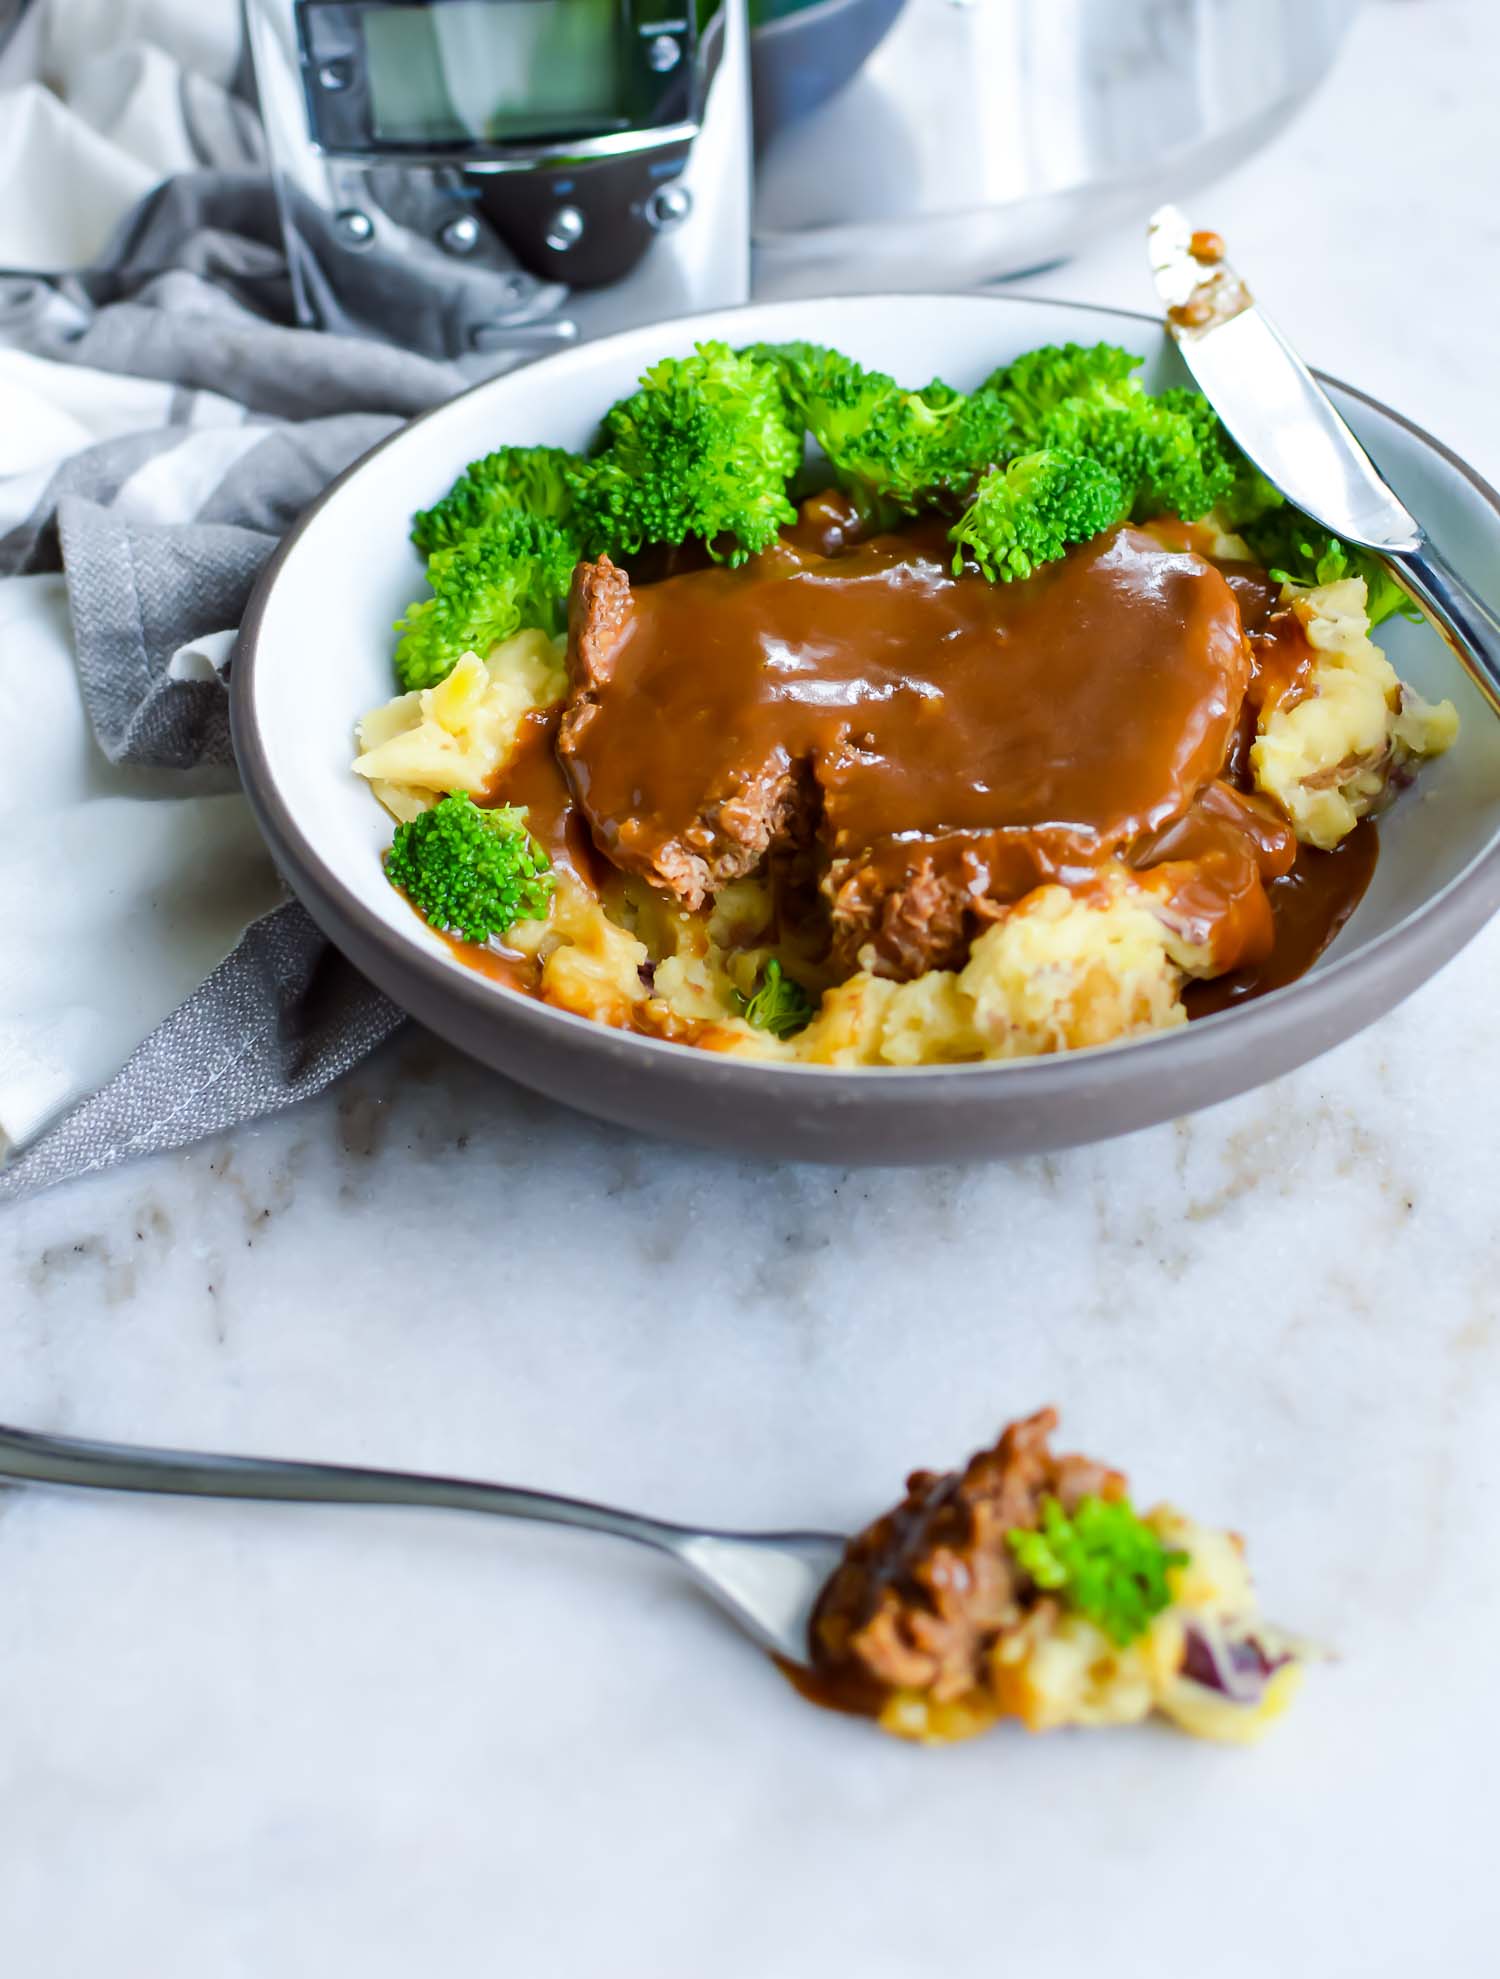 A white bowl with gray rim with meat, gravy, potato, and broccoli with a knife on top with a fork with a bite of food laying in front with a silver slow cooker behind it.